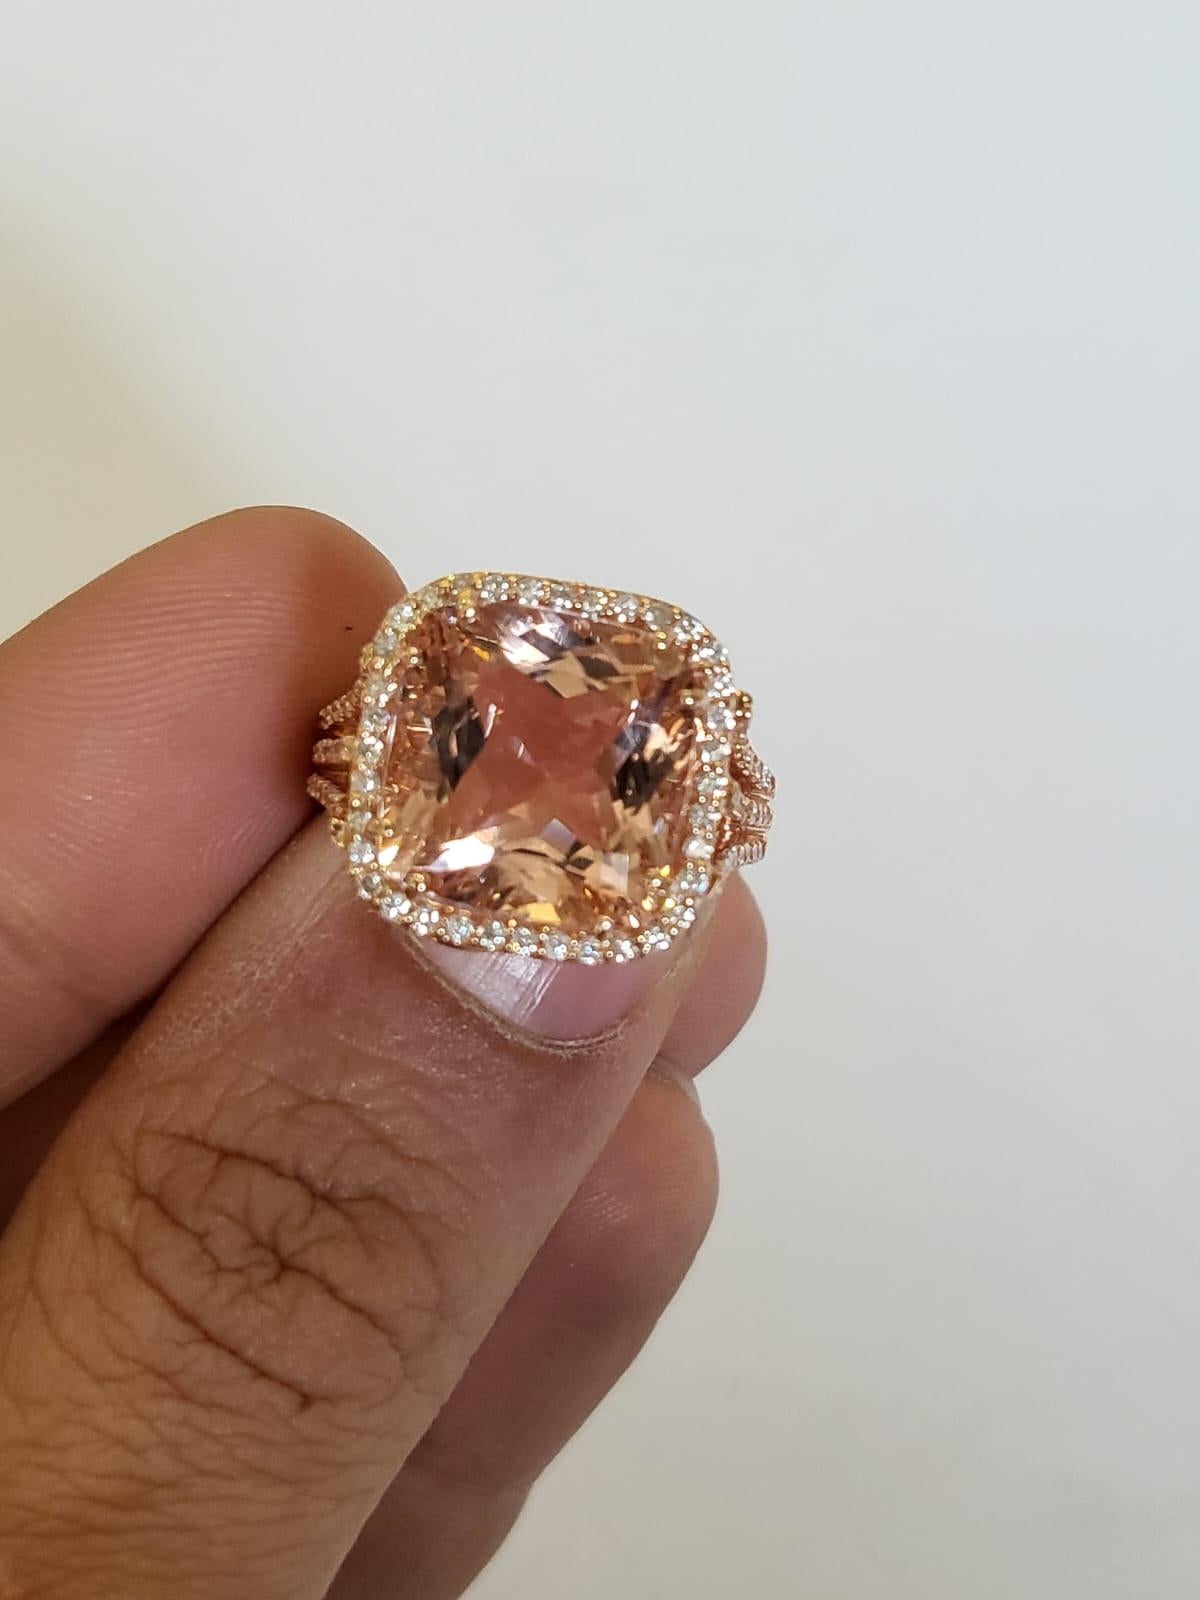 A very chic and gorgeous Morganite Engagement / Cocktail Ring set in 18K Rose Gold. The weight of the Morganite is 8.08 carats. The weight of the Diamonds is 0.45 carats. Net Gold weight is 6.03 grams. The dimensions of the ring are 1.60cm x 1.60cm